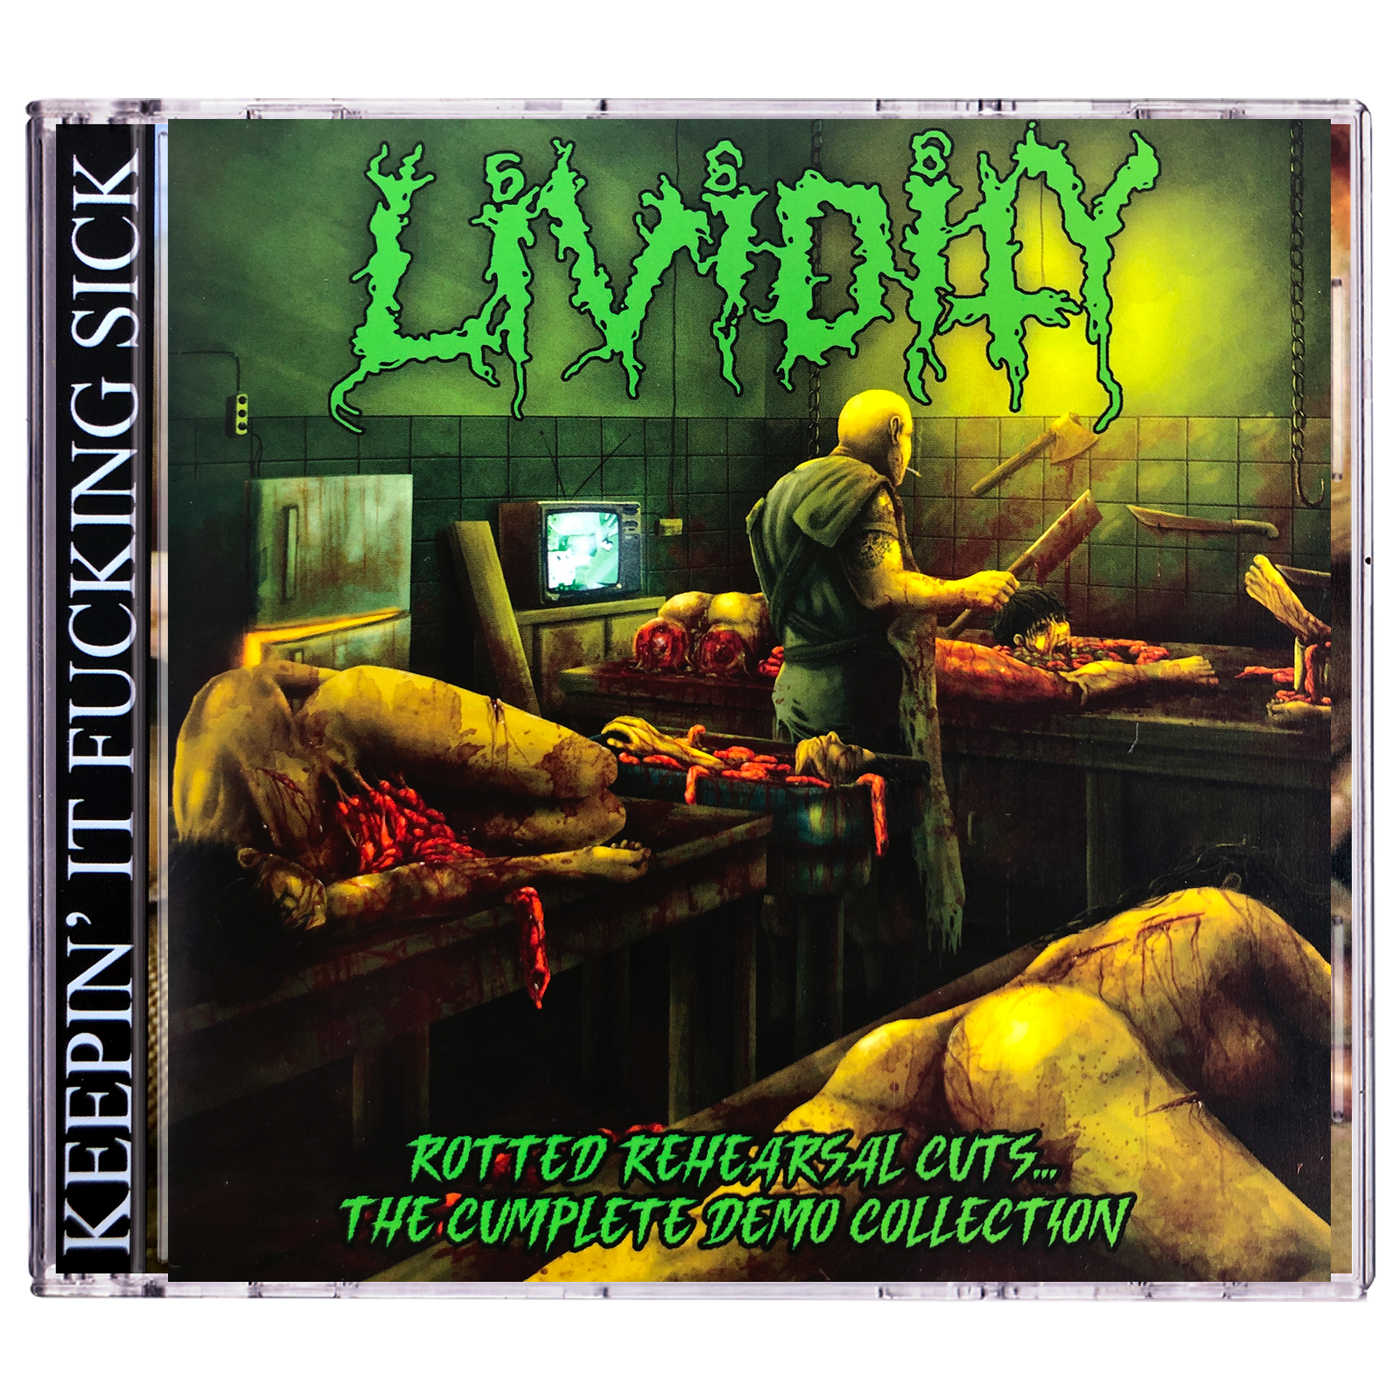 Lividity 'Rotted Rehearsal Cuts...The Cumplete Demo Collection' CD